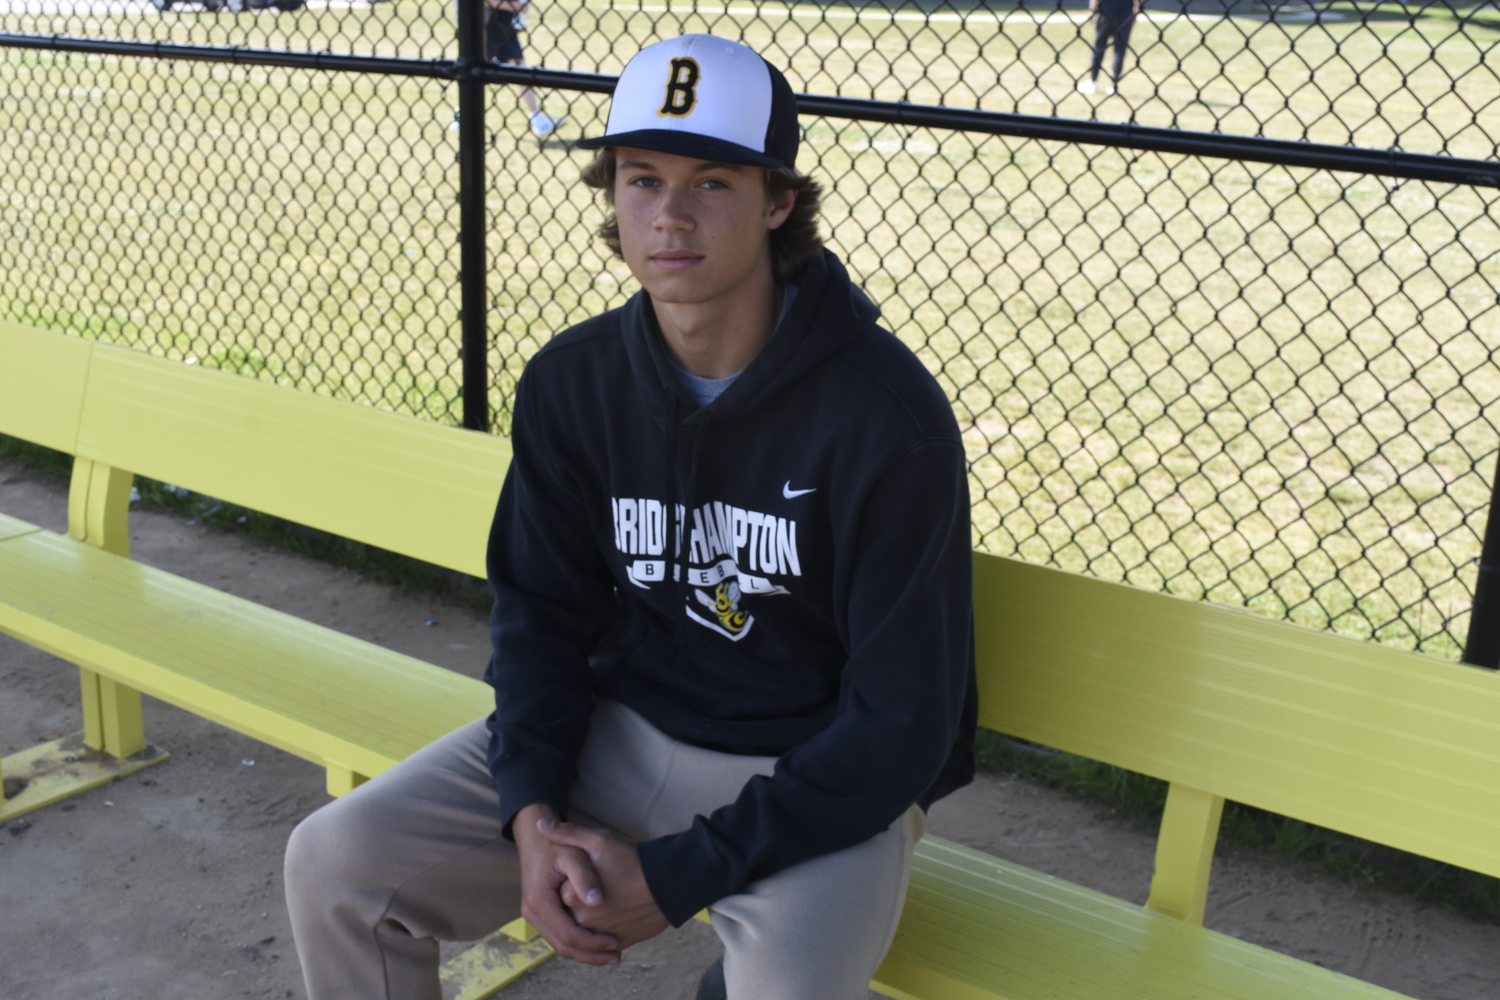 Ross junior Milo Tompkins was named League X MVP this season playing for the Bridgehampton/Ross baseball team. That led to him being nominated for the Carl Yastrzemski Award as the top baseball player in Suffolk County.   DREW BUDD